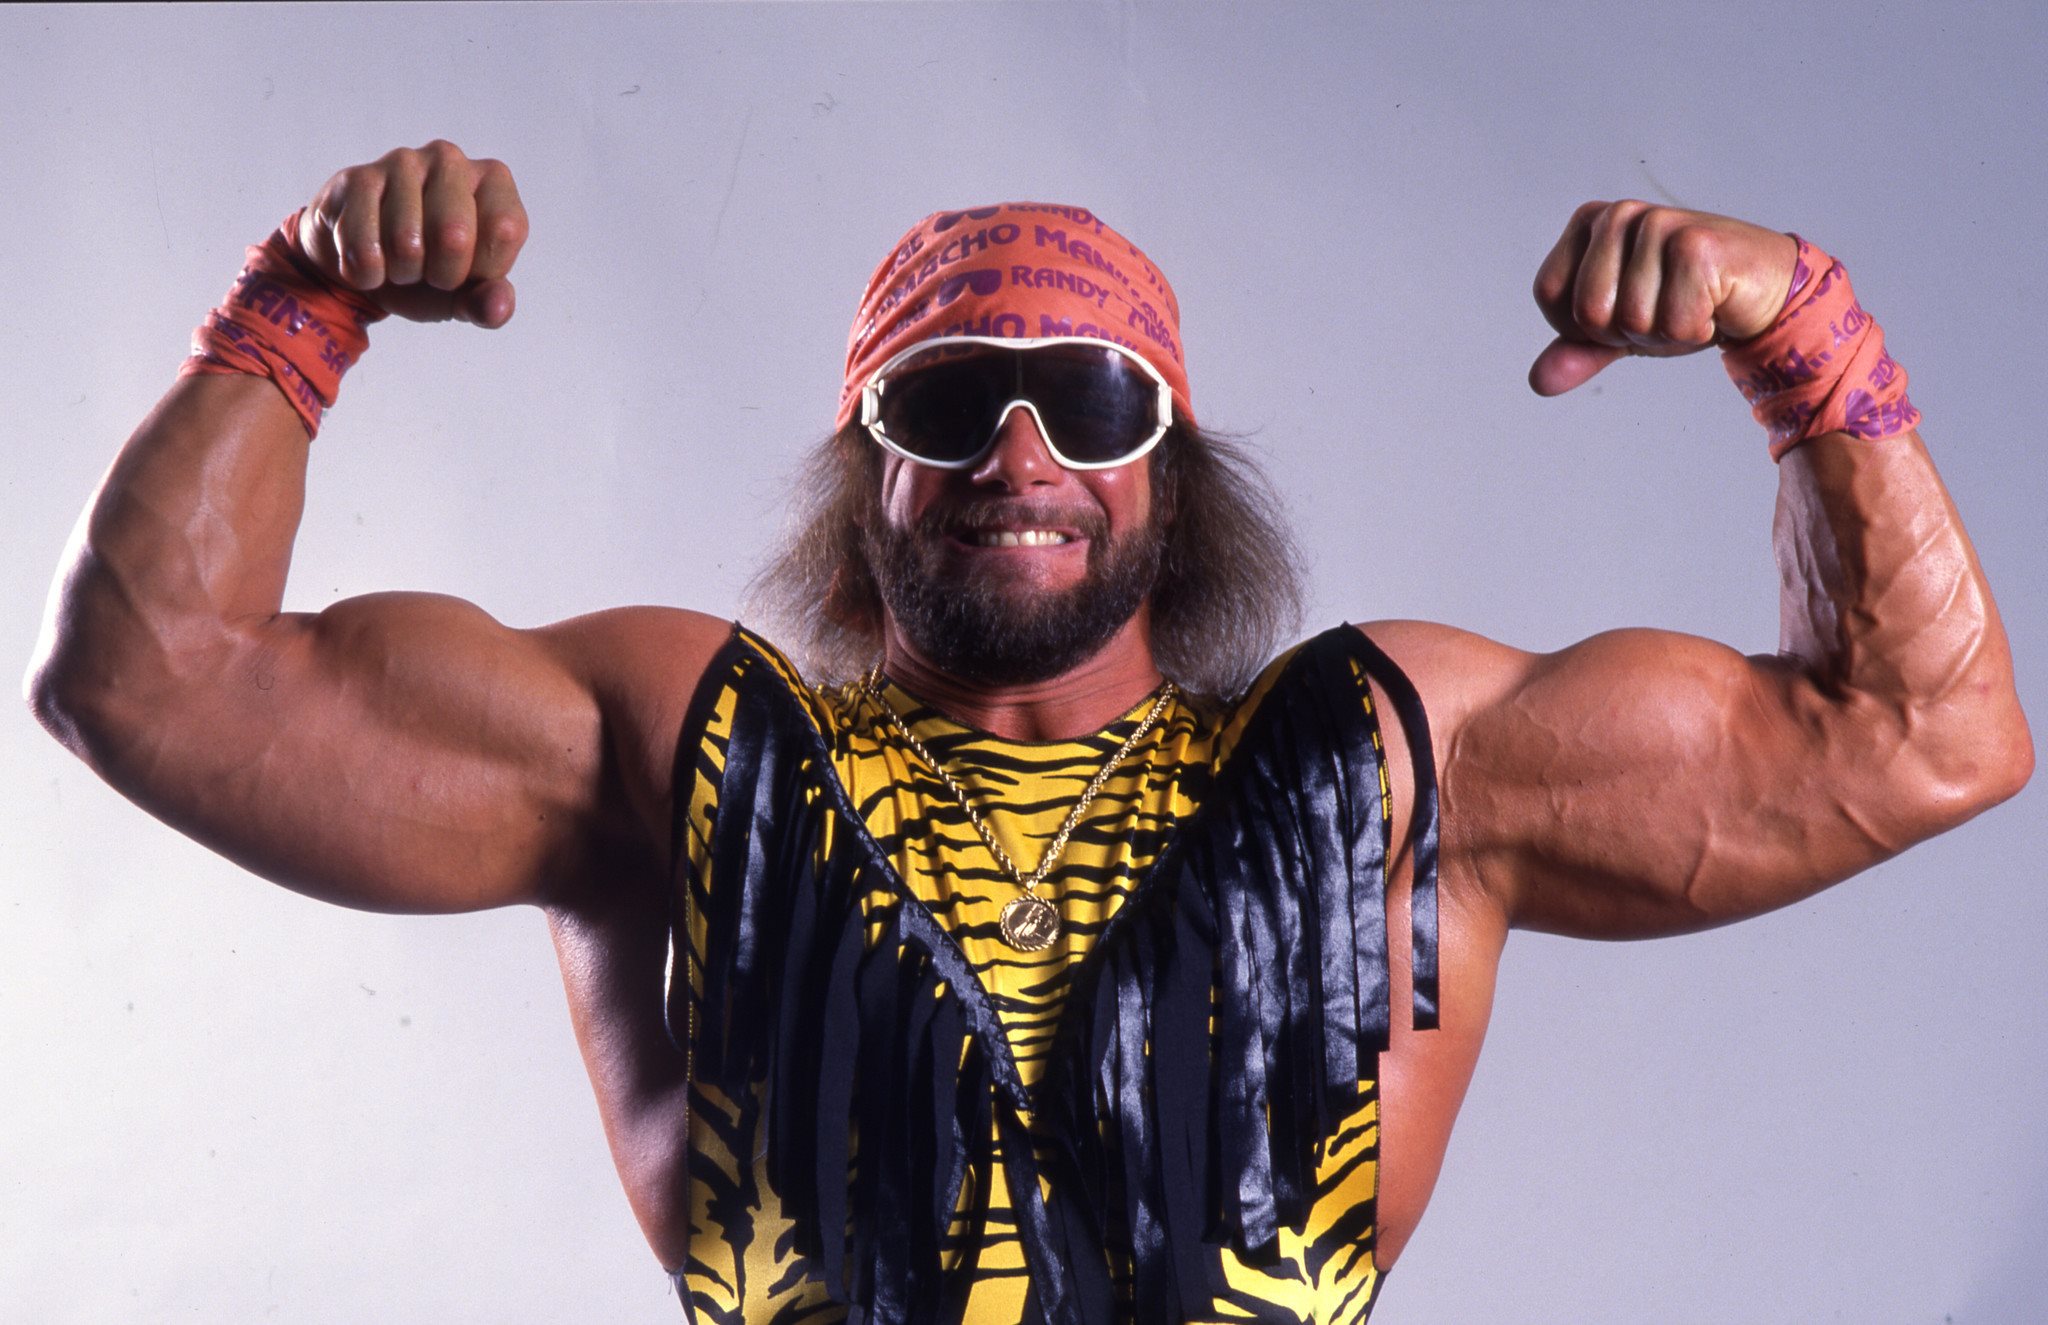 https://facts.net/wp-content/uploads/2023/07/20-facts-about-randy-savage-1688888123.jpg